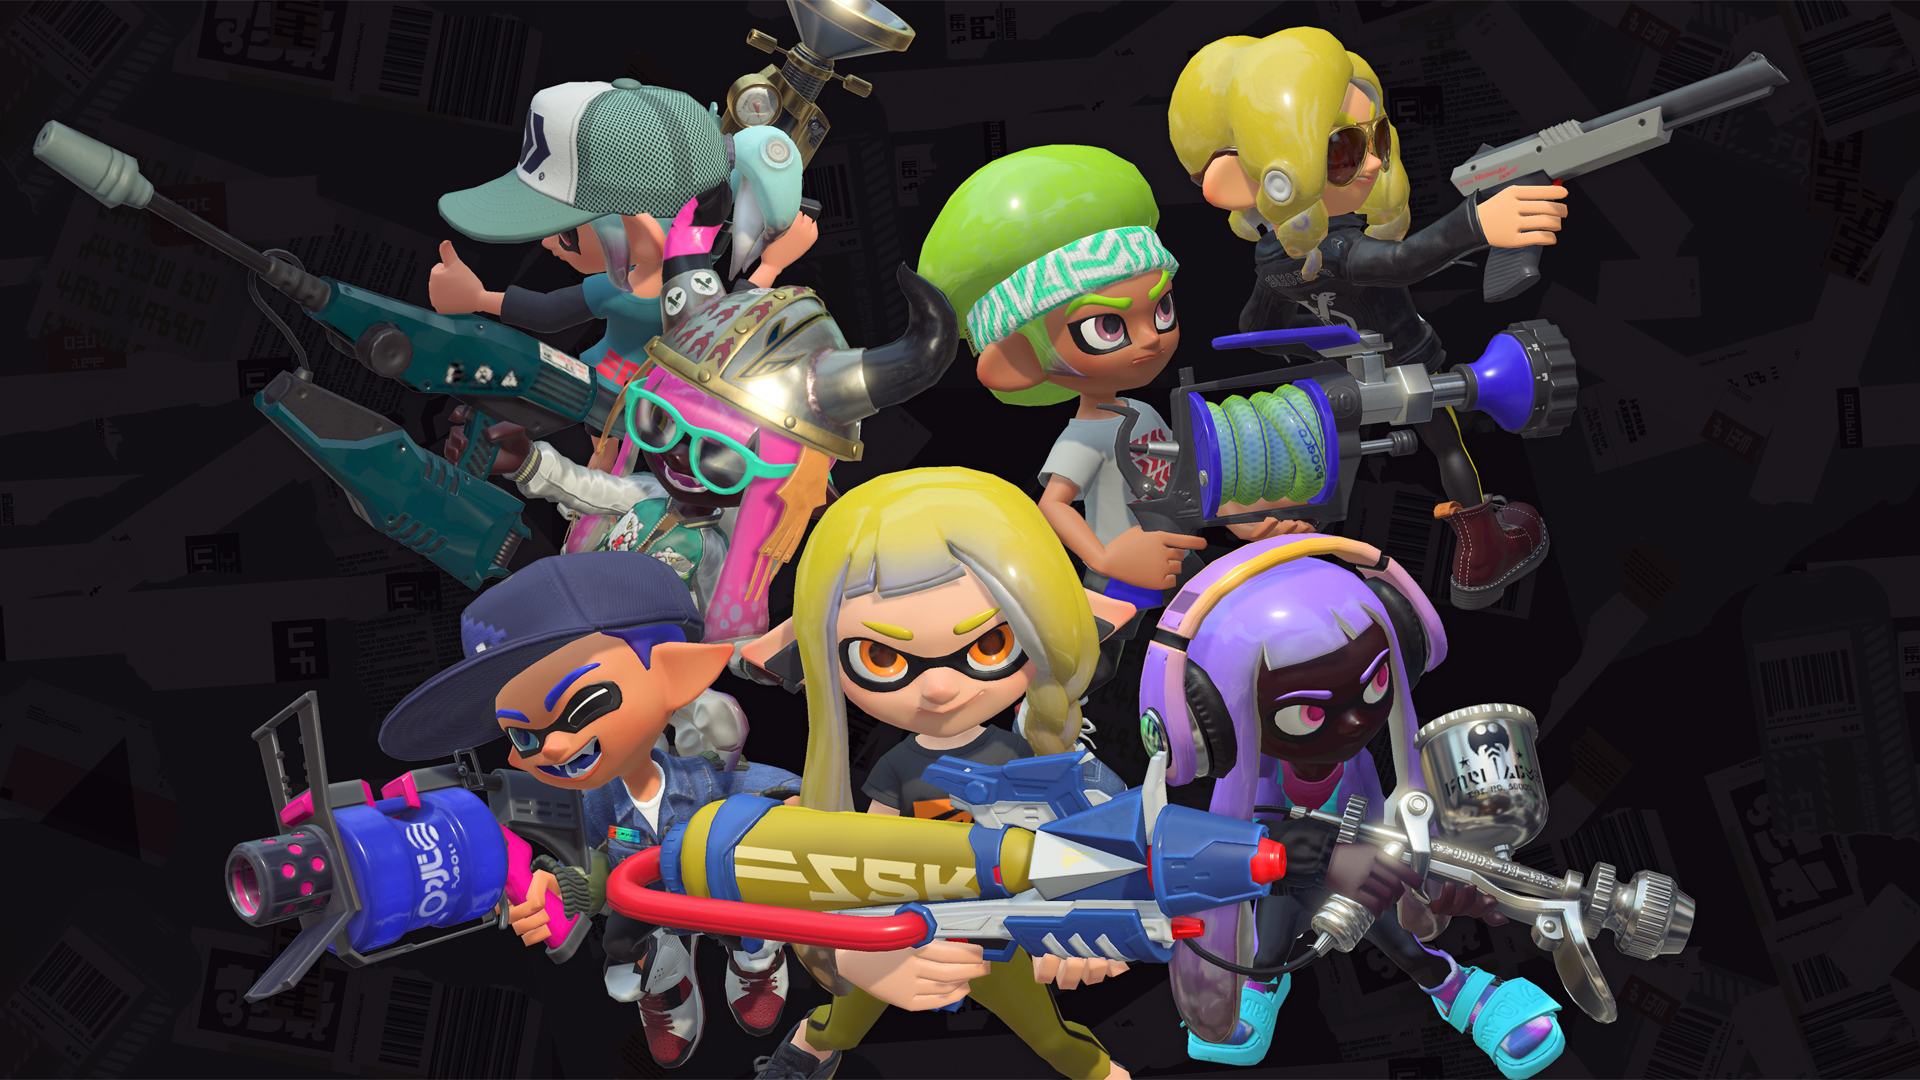 Nintendo Of Europe Confirmed All The Basic Weapons From Previous Games Will Be Returning For Splatoon3 T Co Xrhdg6exgy Twitter